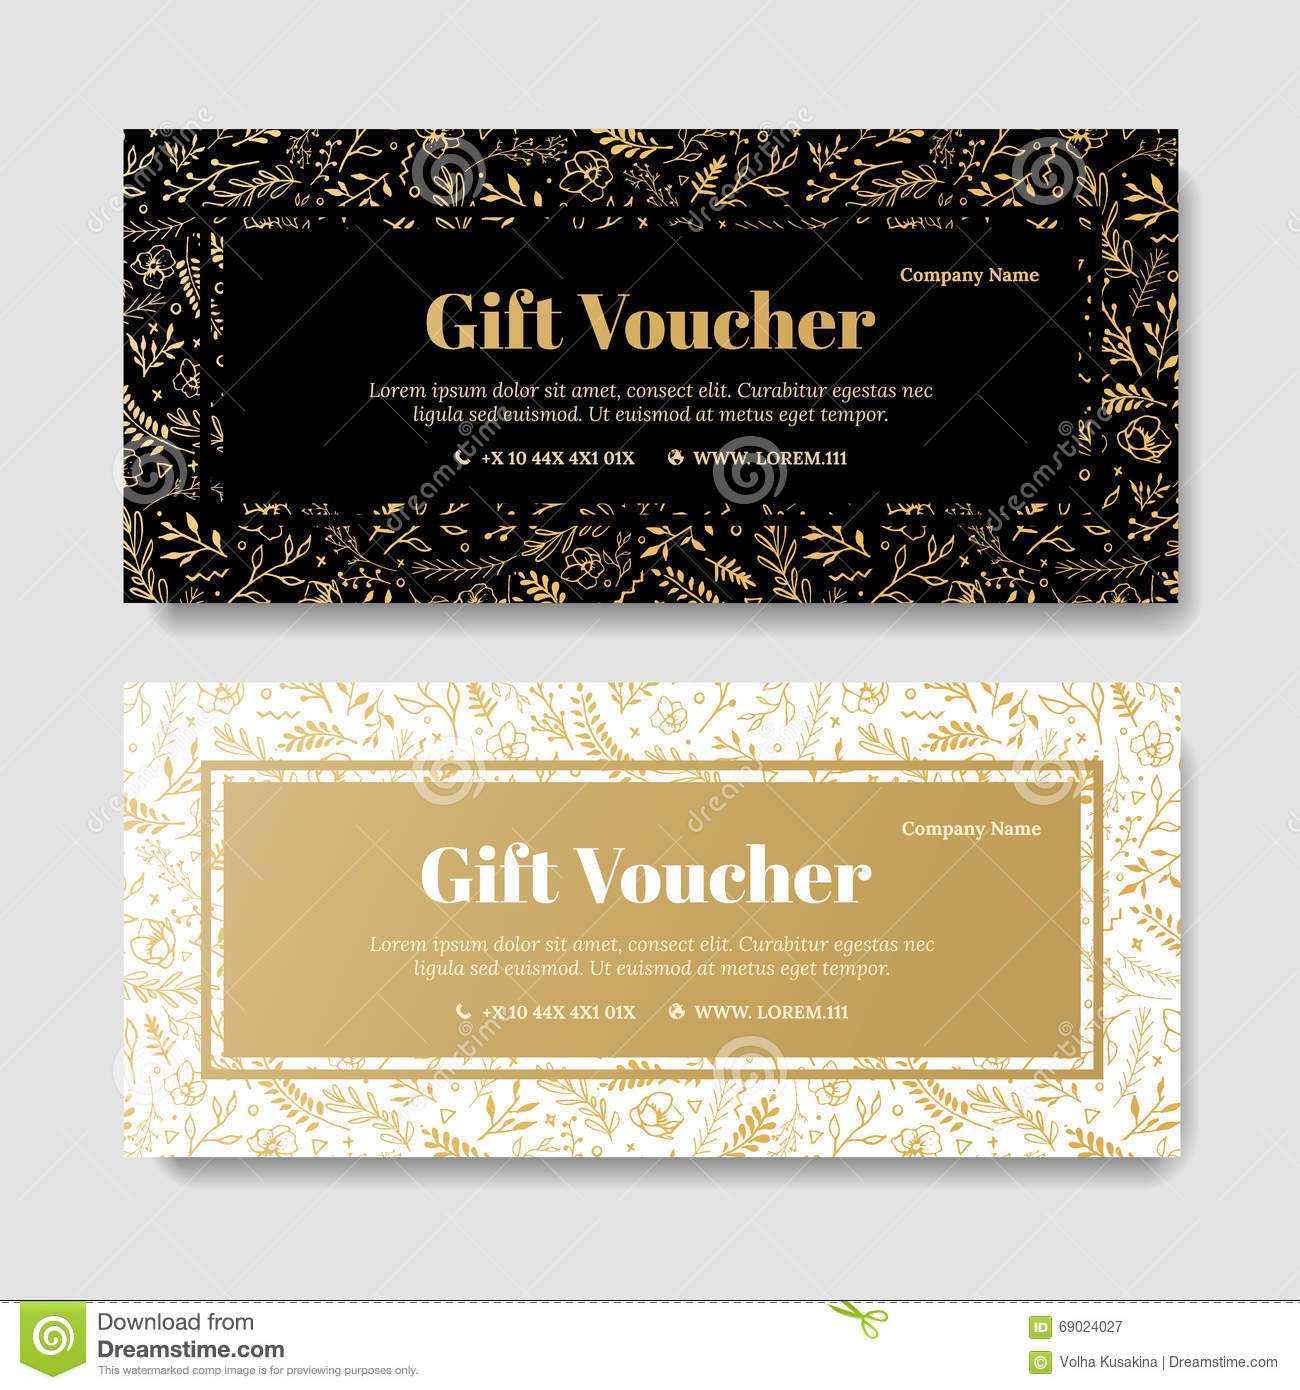 Gift Premium Voucher, Coupon Template. Stock Illustration Within Spa Day Gift Certificate Template